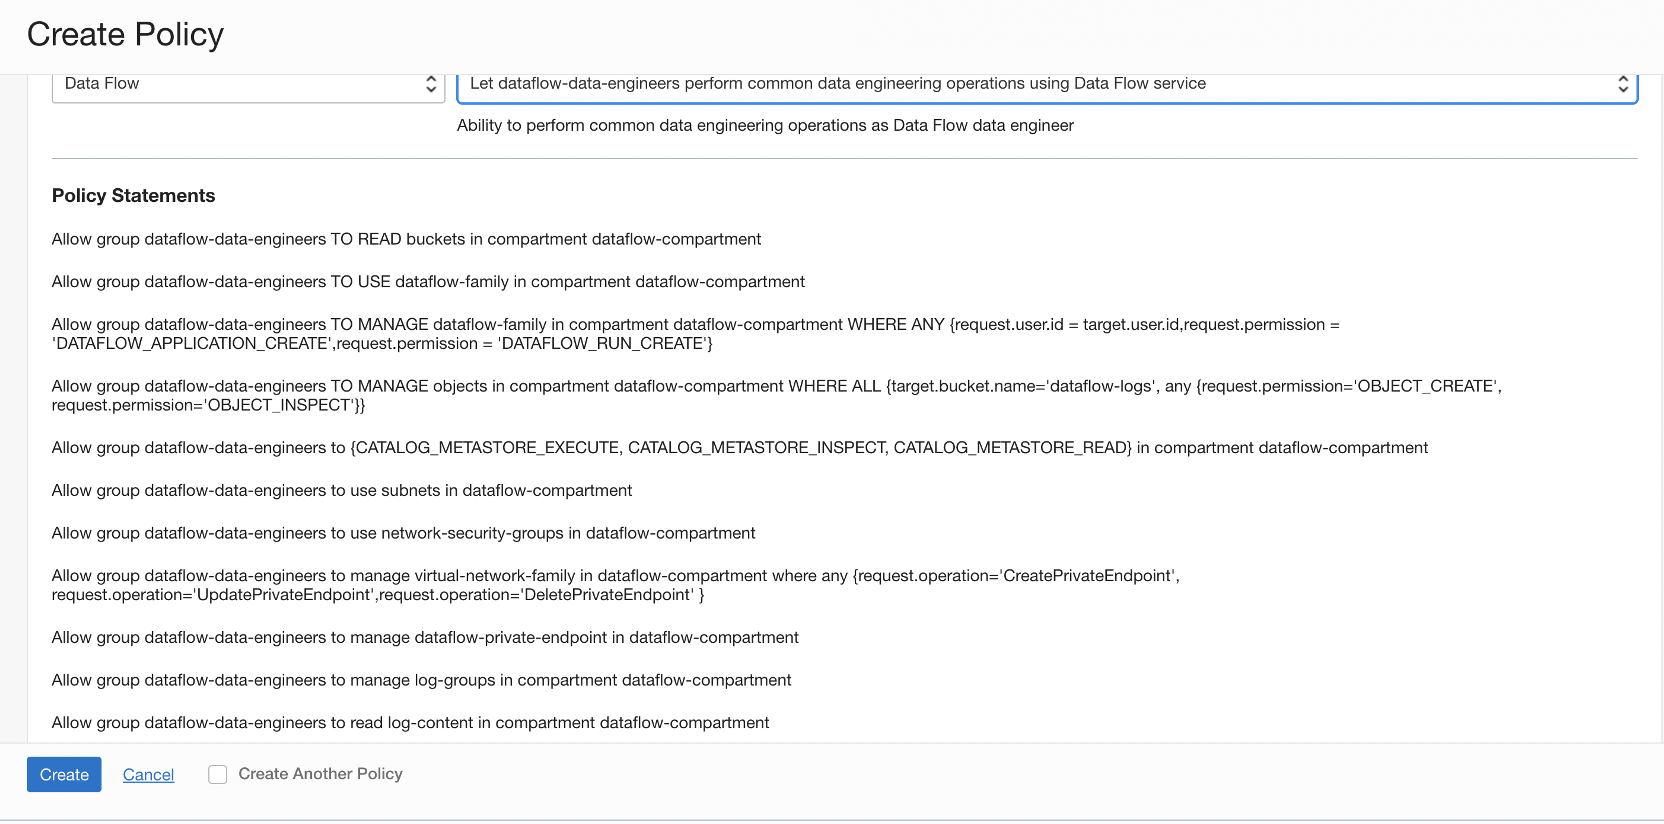 The policy Let dataflow-data-engineers perform common data engineering operations using Data Flow service is selected, and the policy statements for it are displayed.